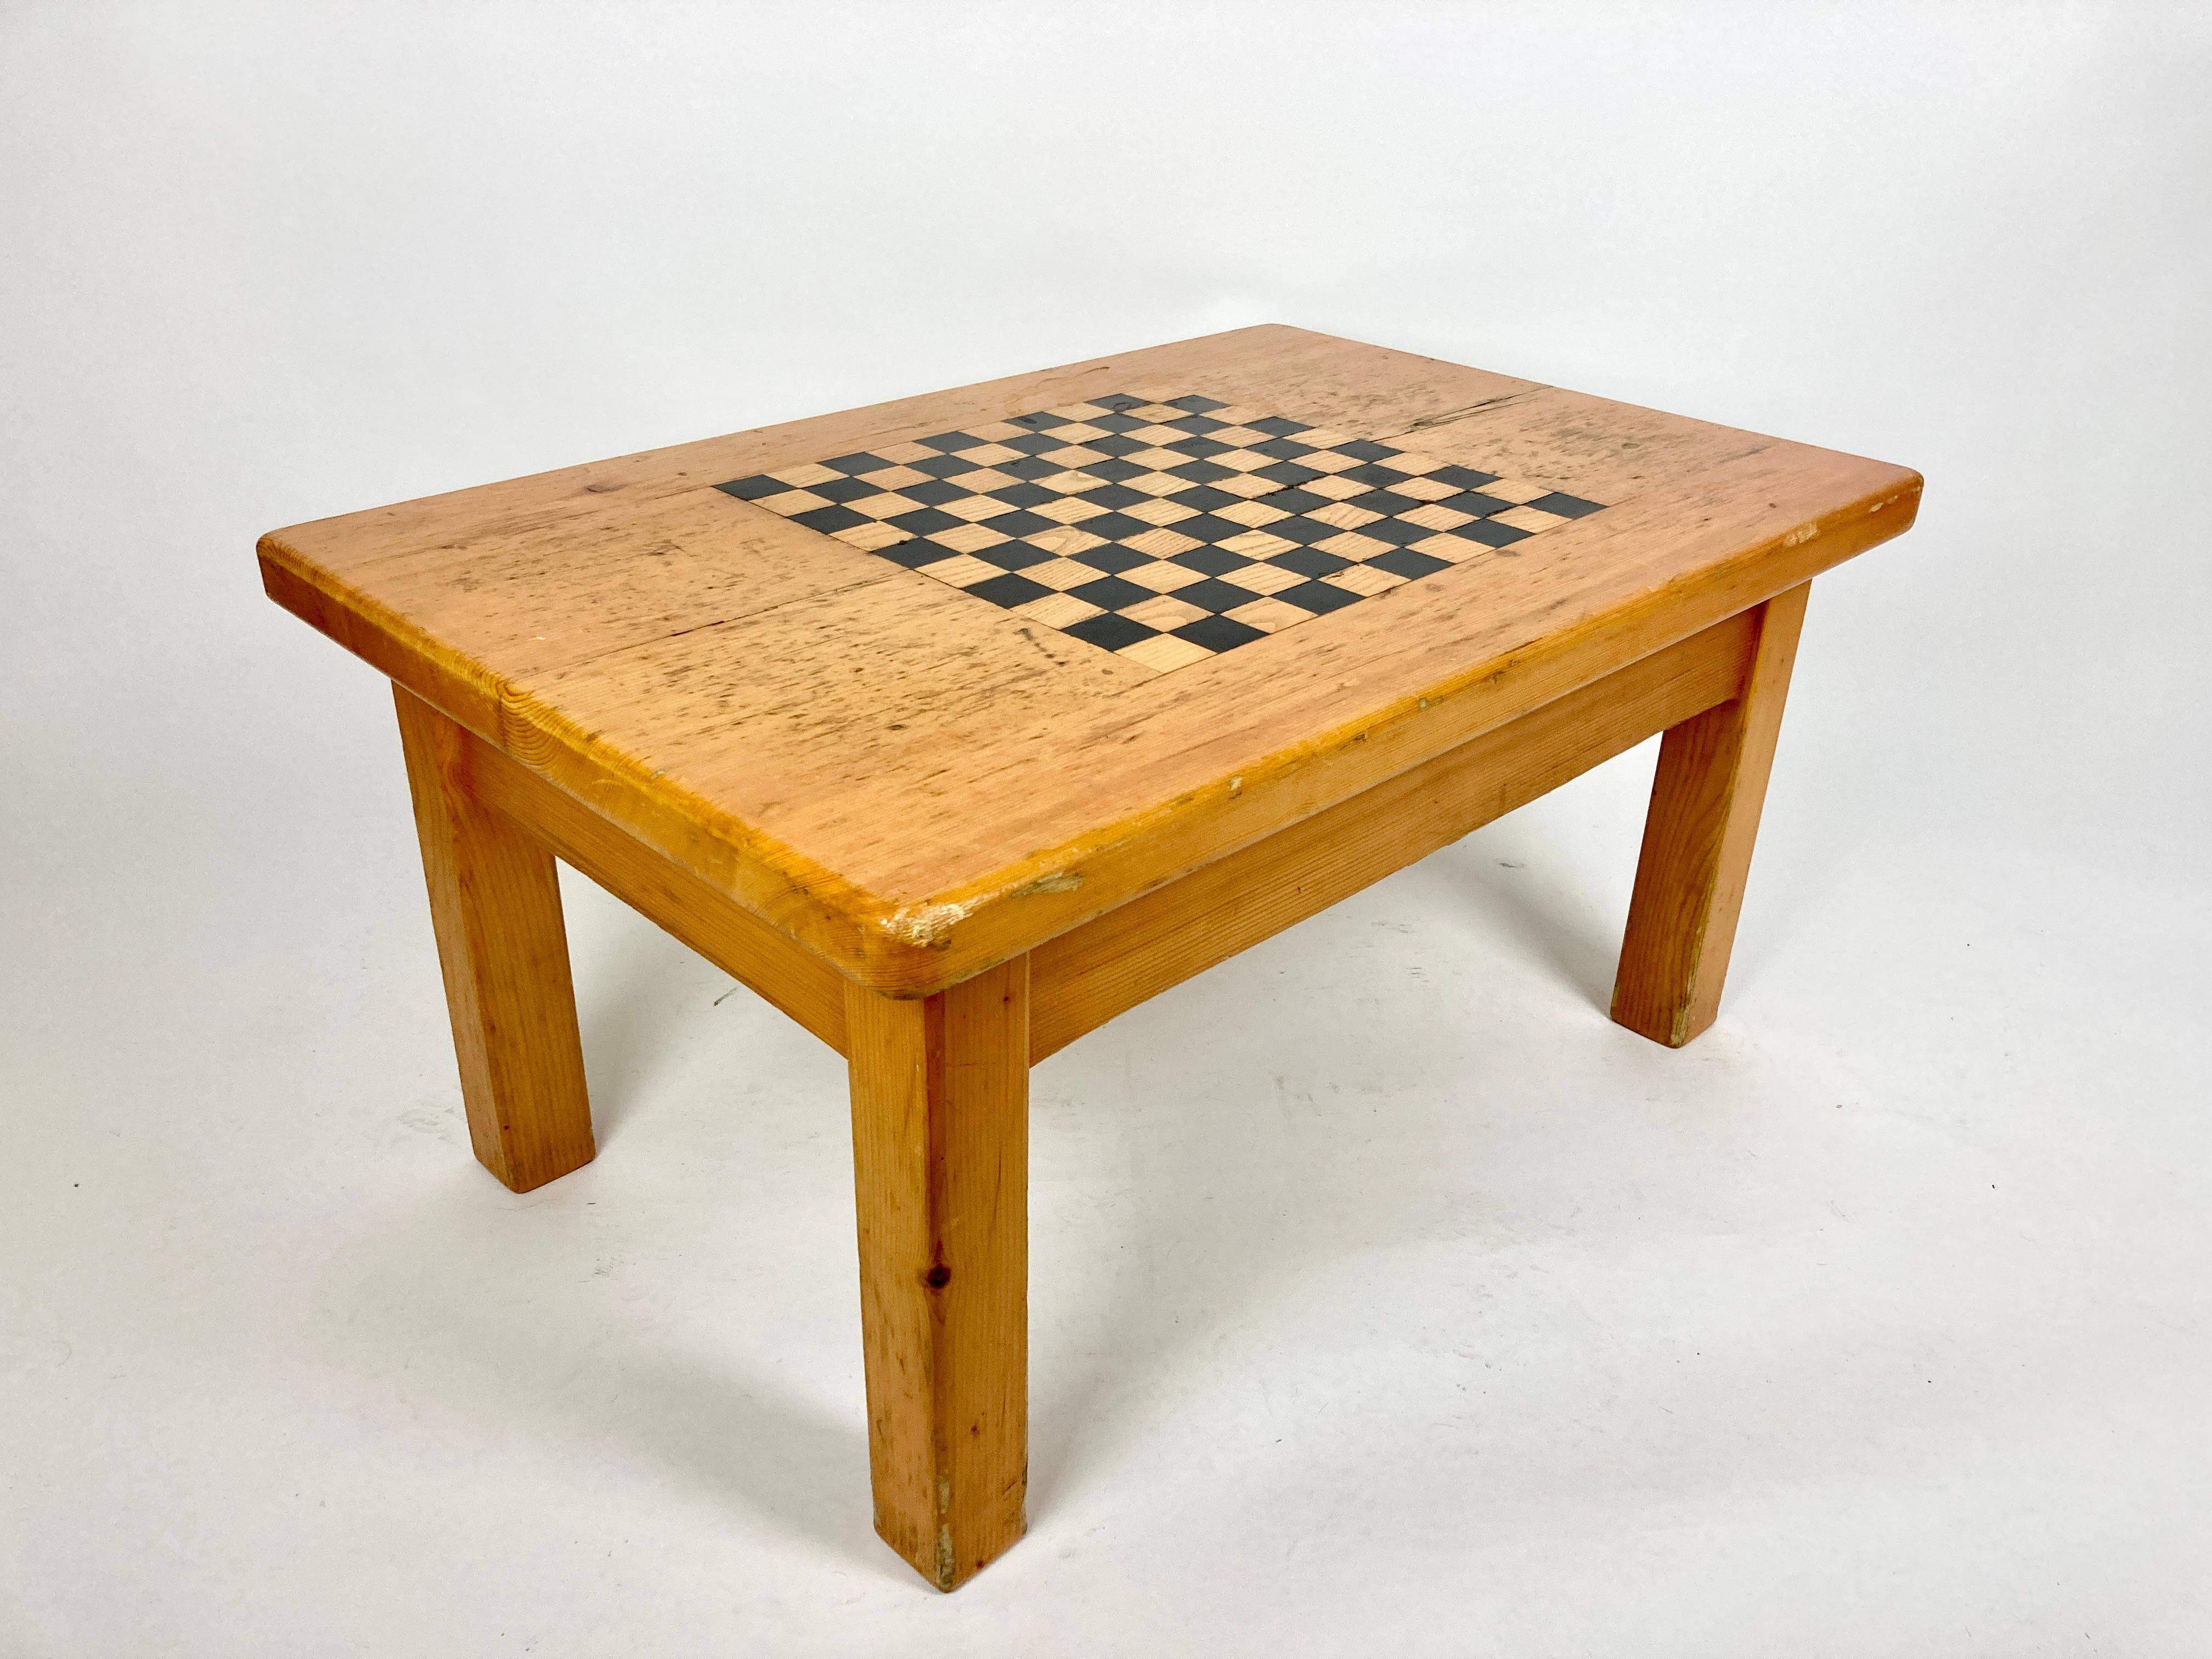 Pine Vintage French Alpine Chalet Coffee Table with Inlaid Chequer Board